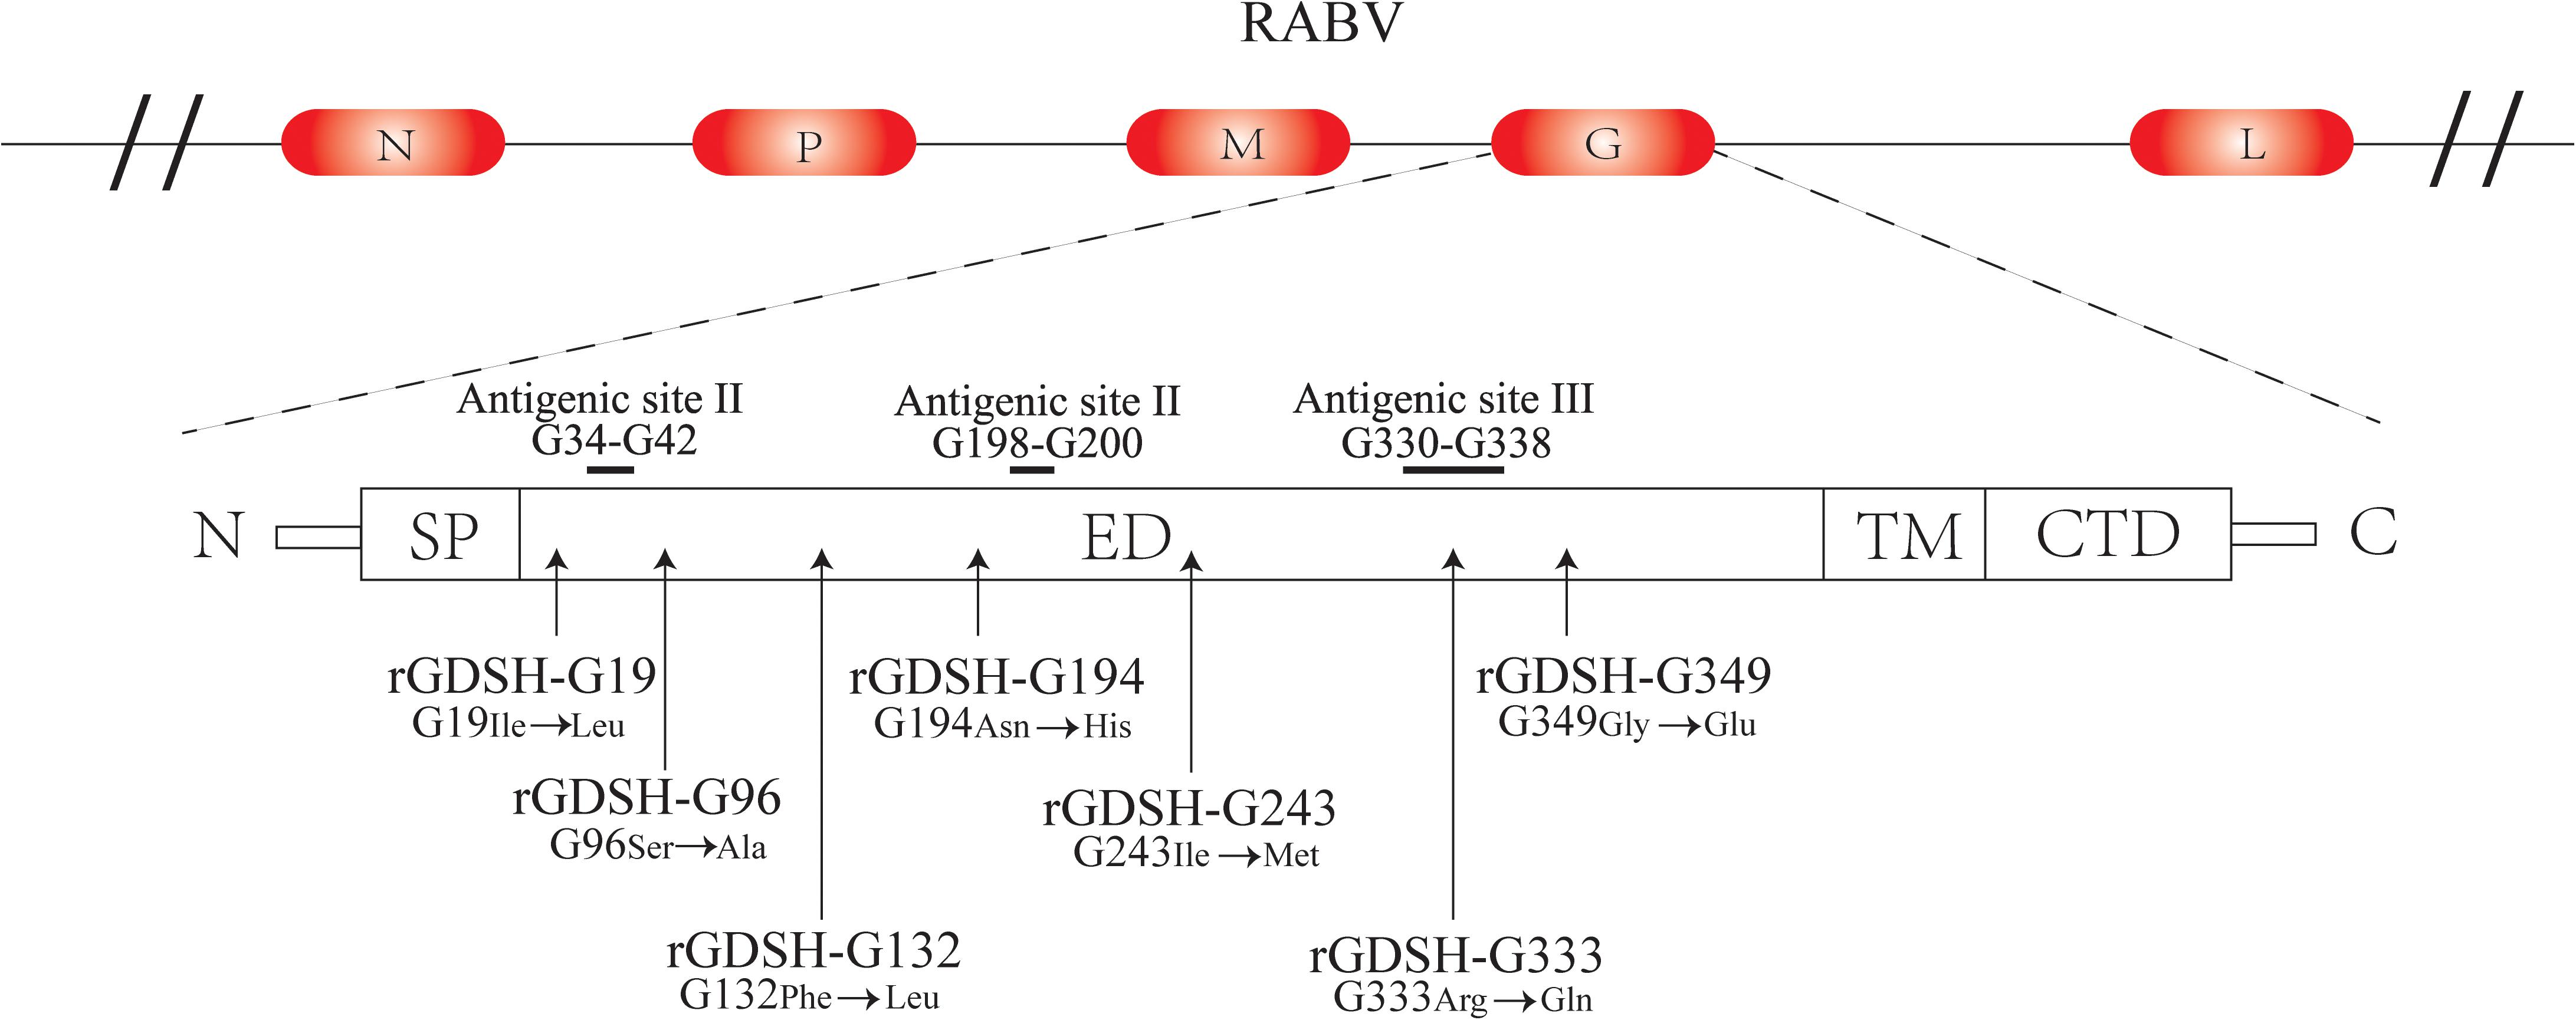 Frontiers Amino Acid Mutation In Position 349 Of Glycoprotein Affect The Pathogenicity Of Rabies Virus Microbiology